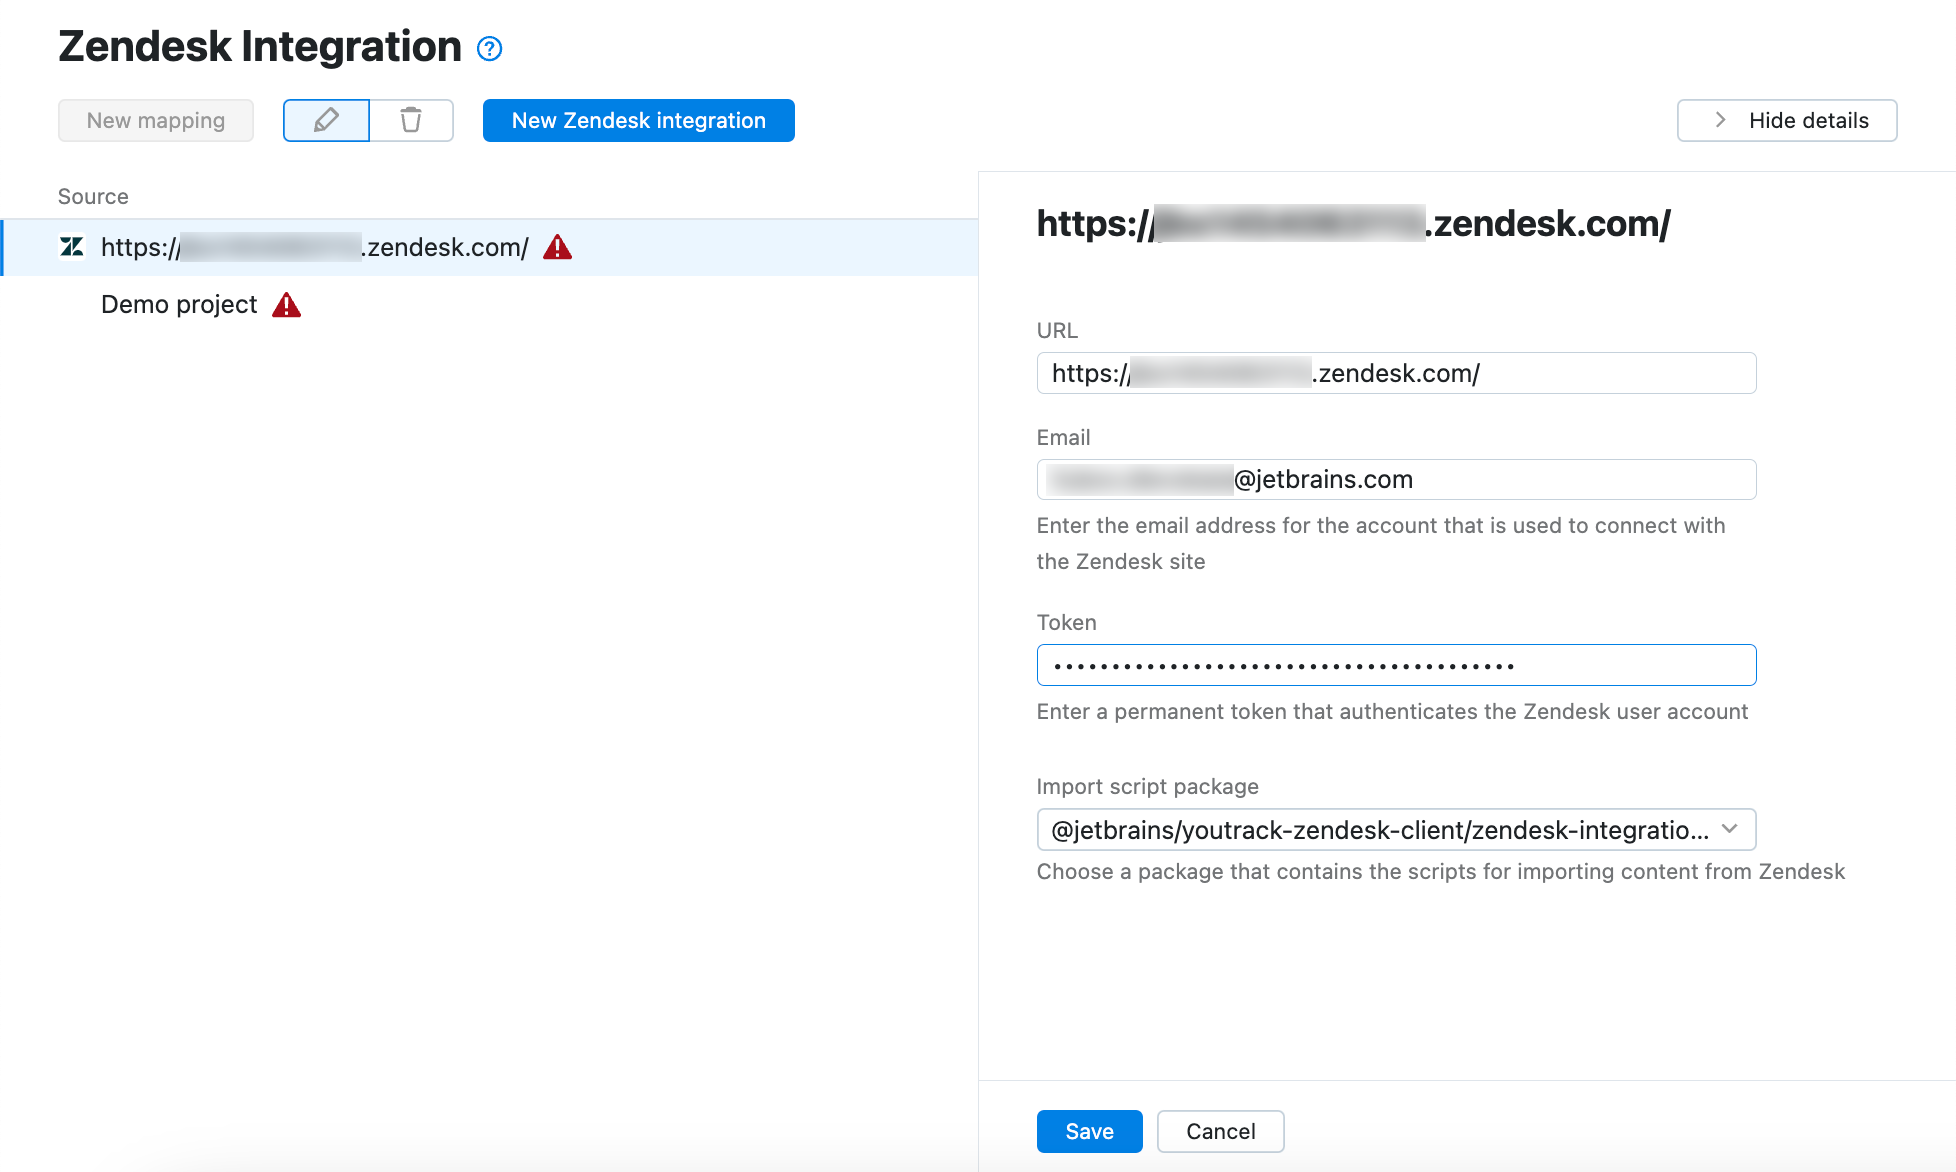 Connection settings for a Zendesk integration